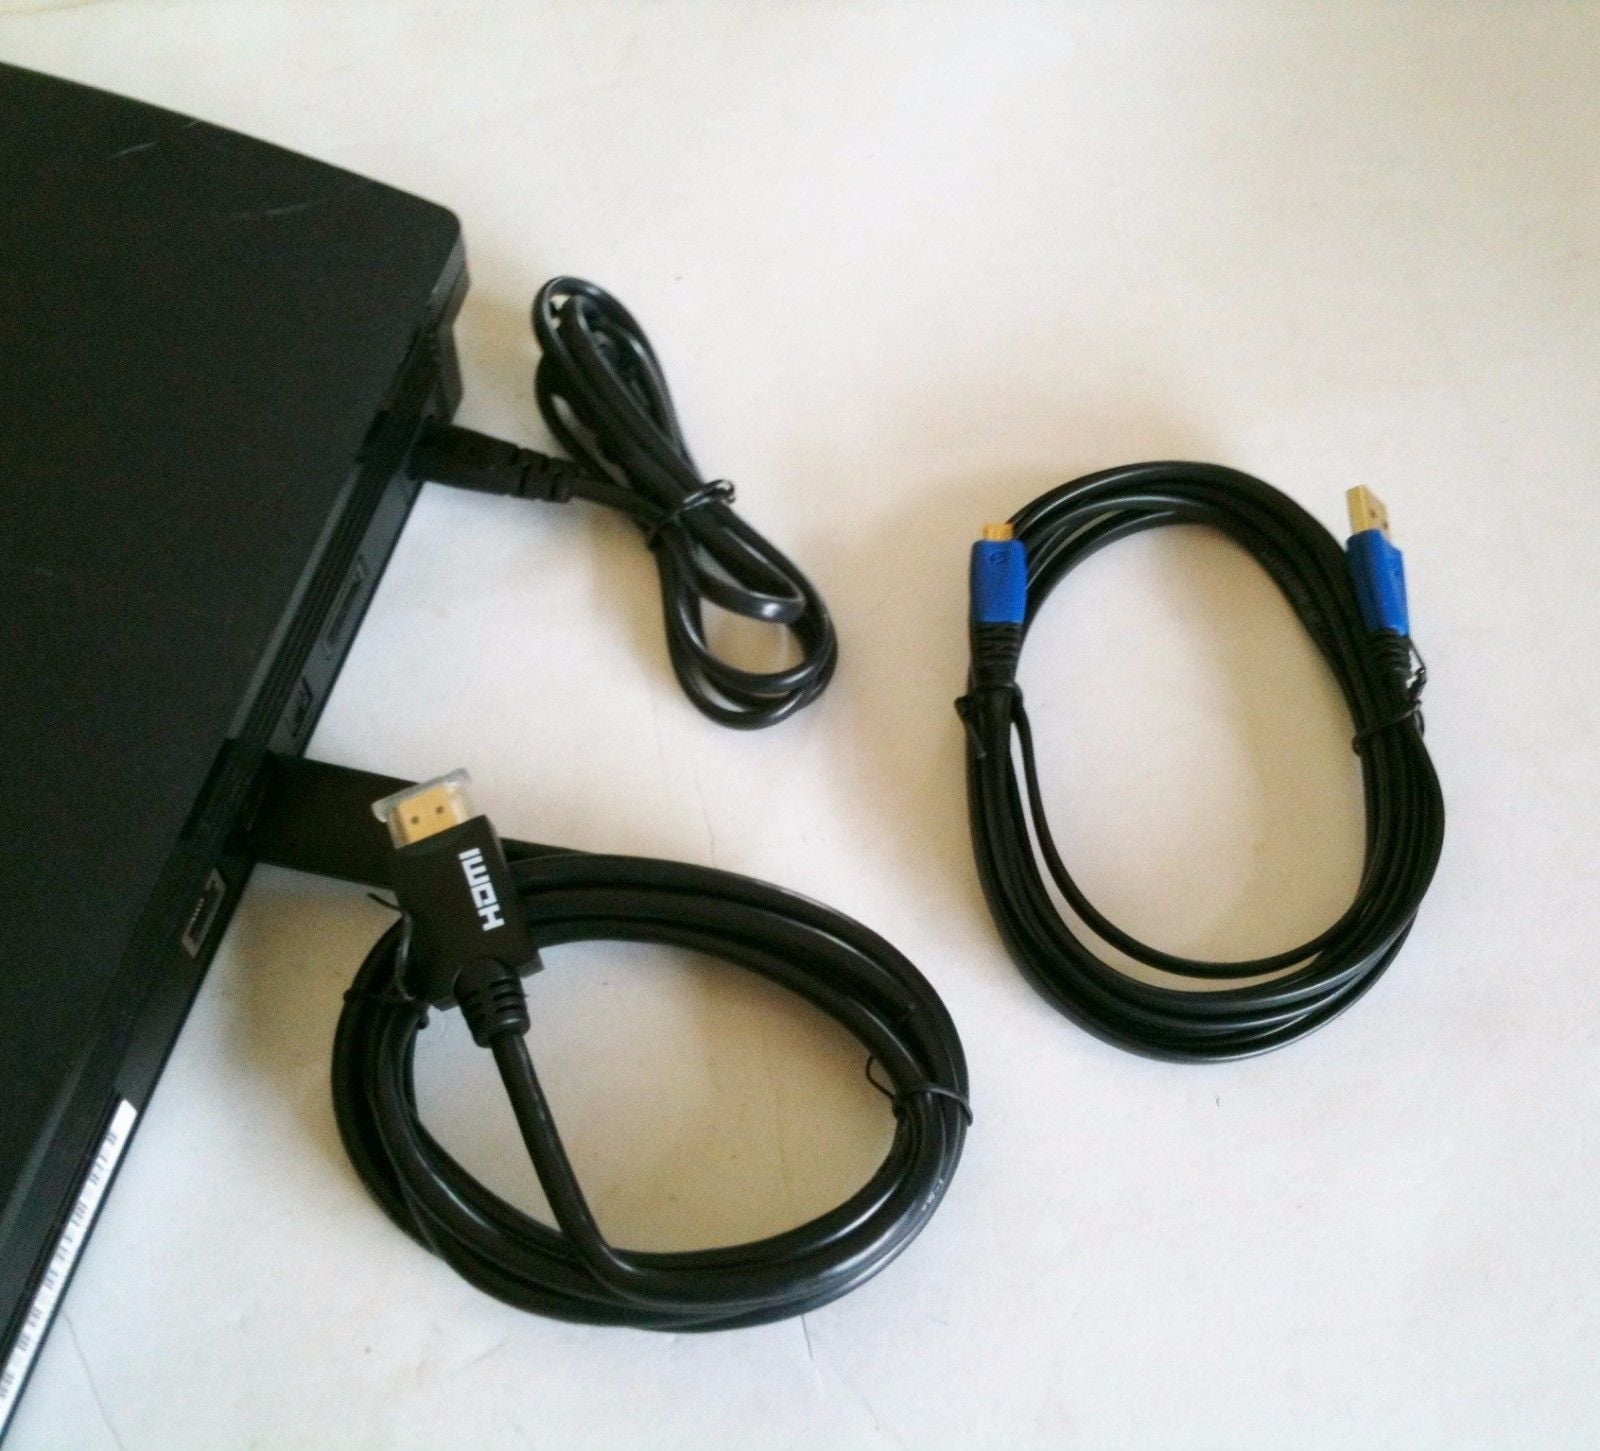 Playstation 4 Connection Bundle Kit - Power Cord, HDMI Cable, Controller  Charger